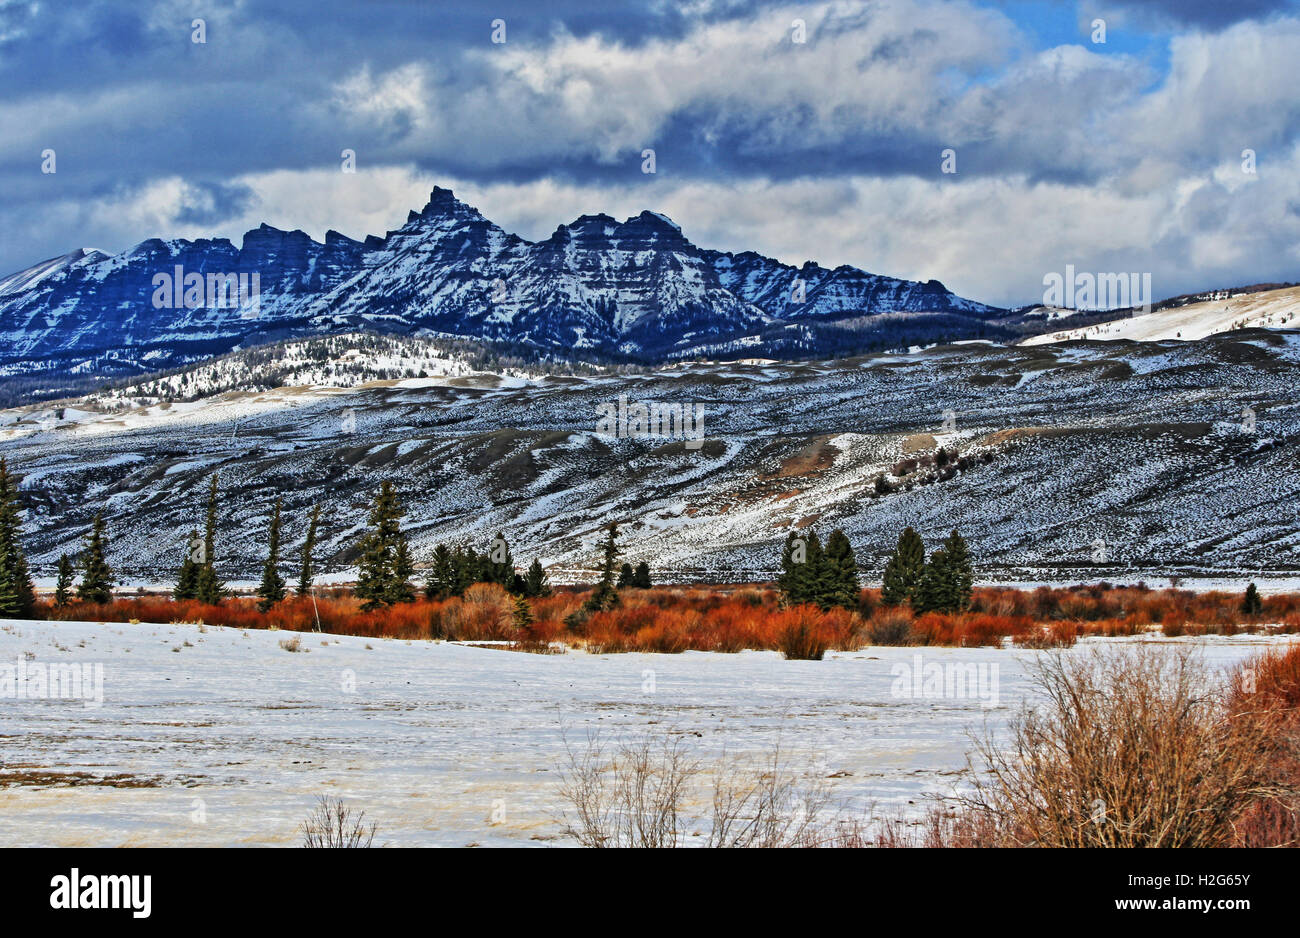 Sublette Peak and willow snowfields in the Absaroka Mountain Range on Togwotee Pass in Wyoming USA Stock Photo